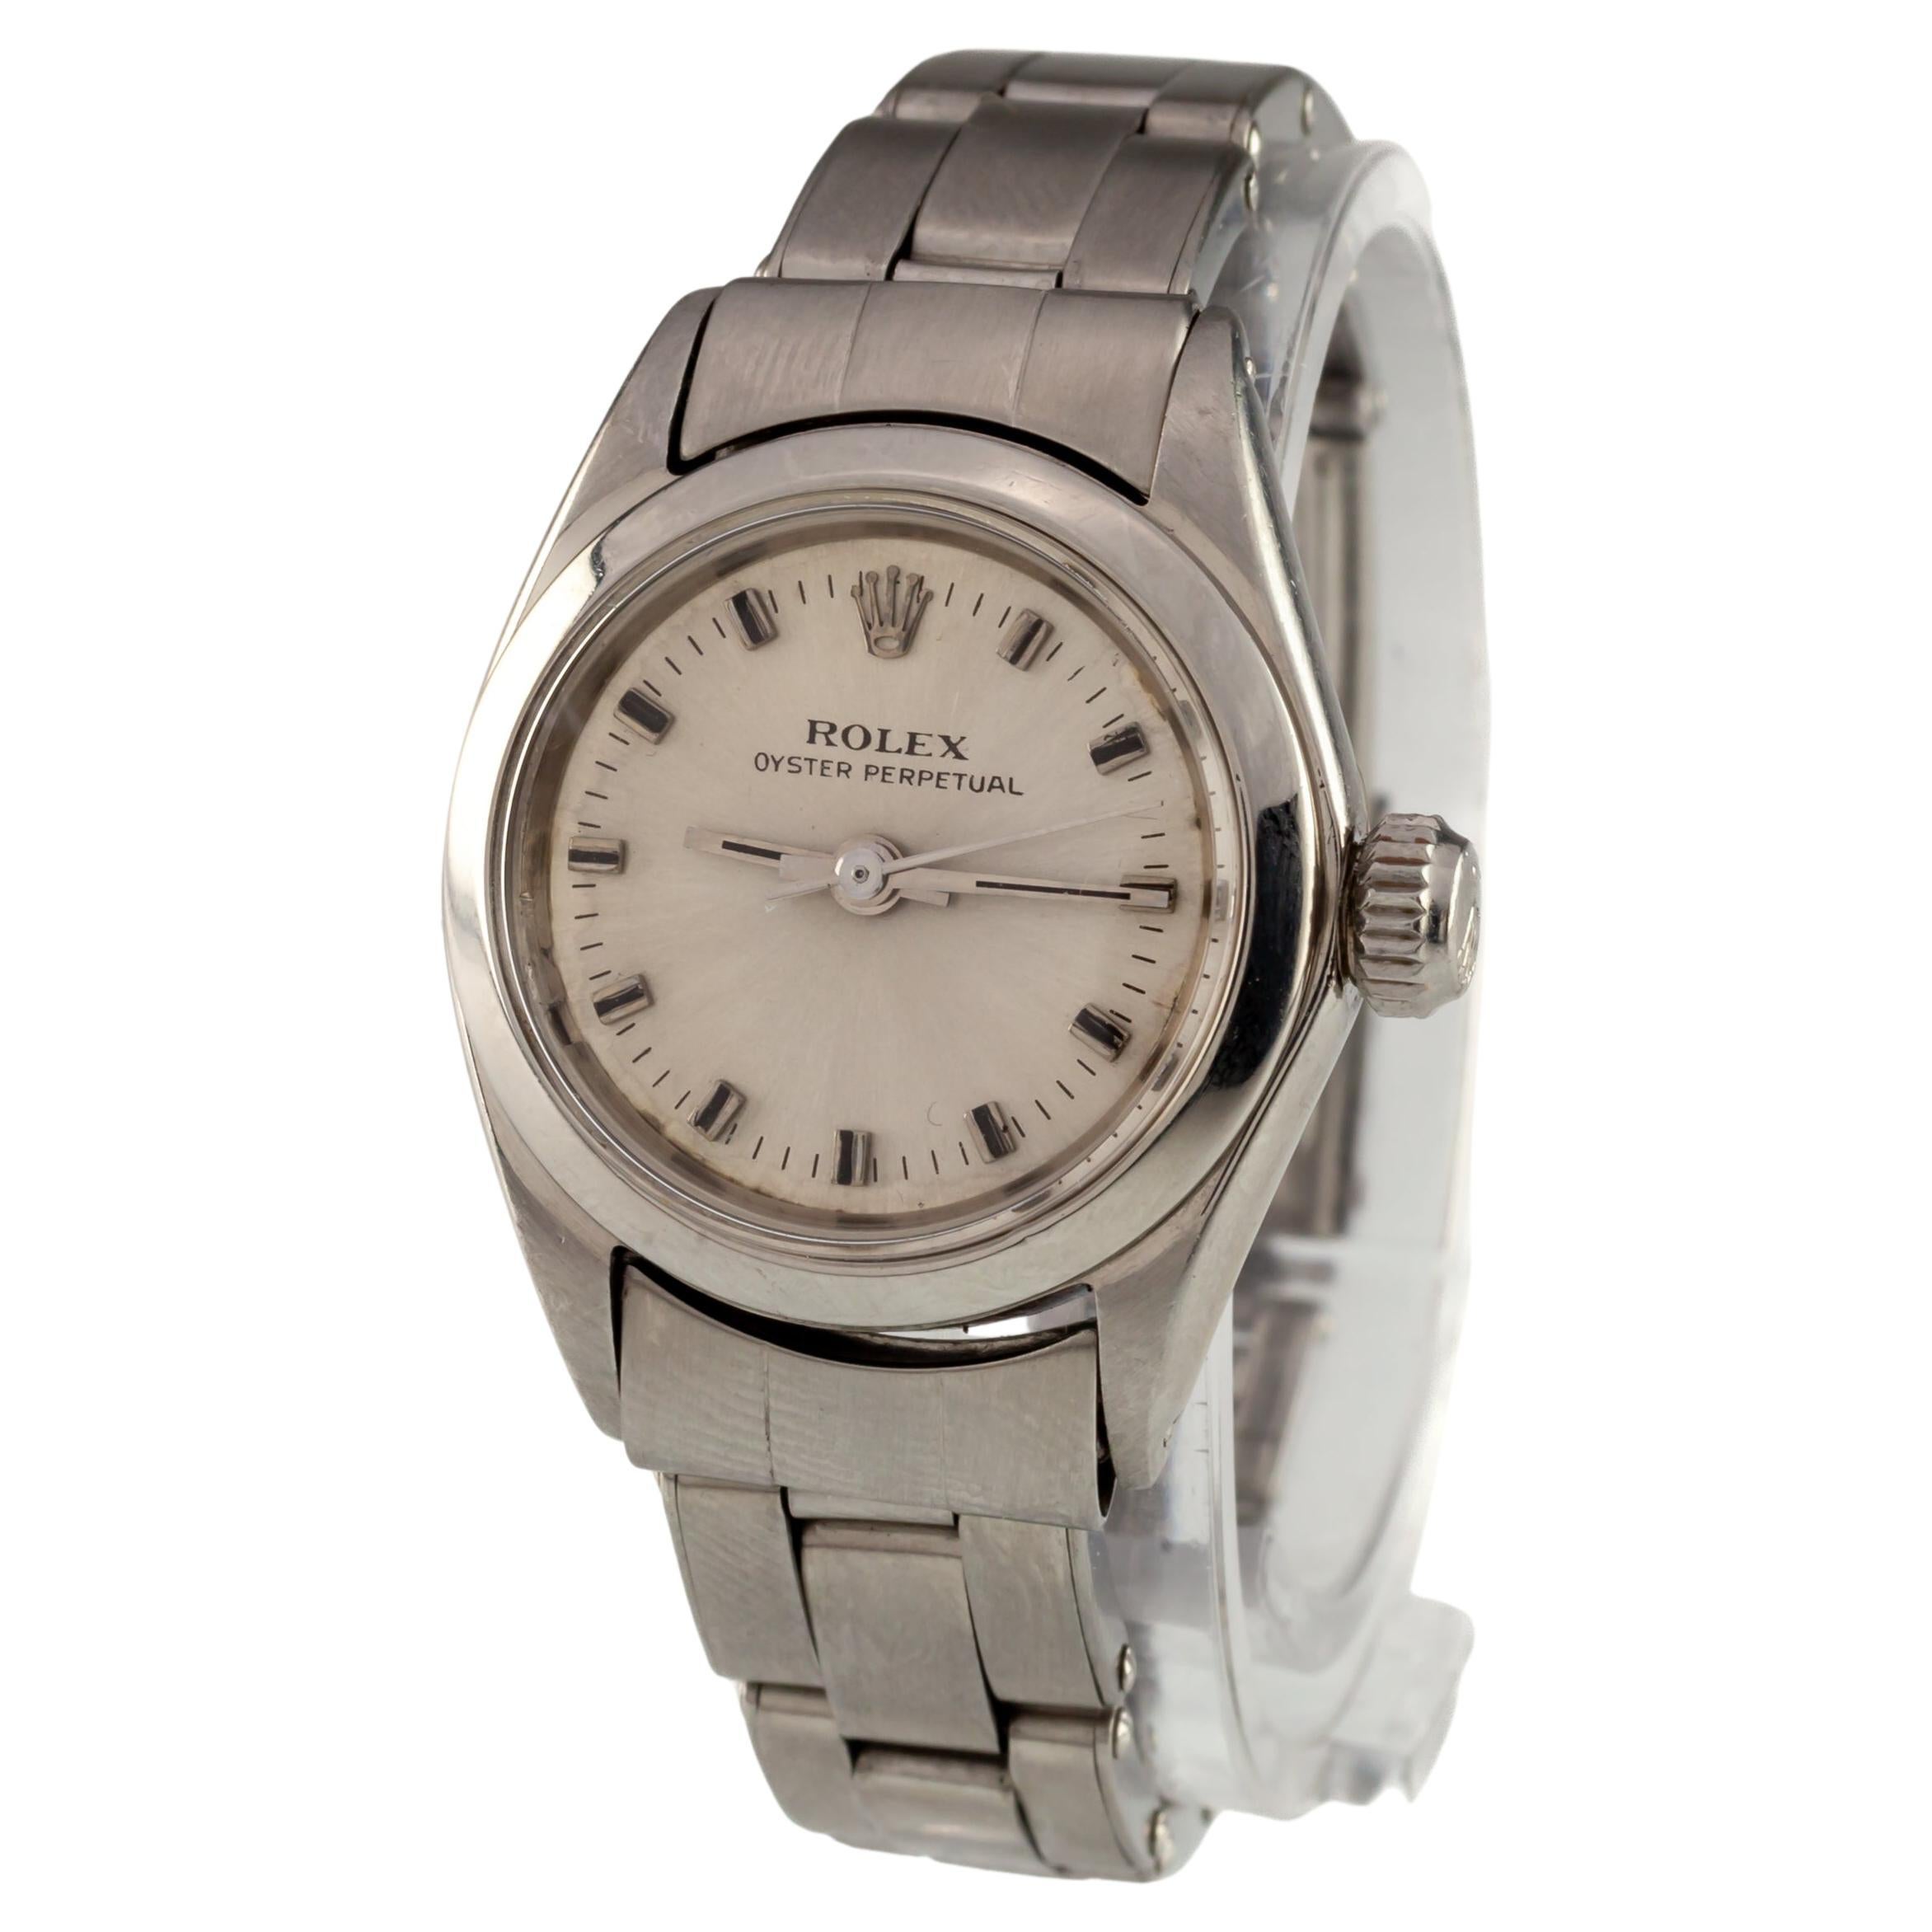 Rolex Ladies Stainless Steel Oyster Perpetual Watch #6618 1969 Vintage For Sale